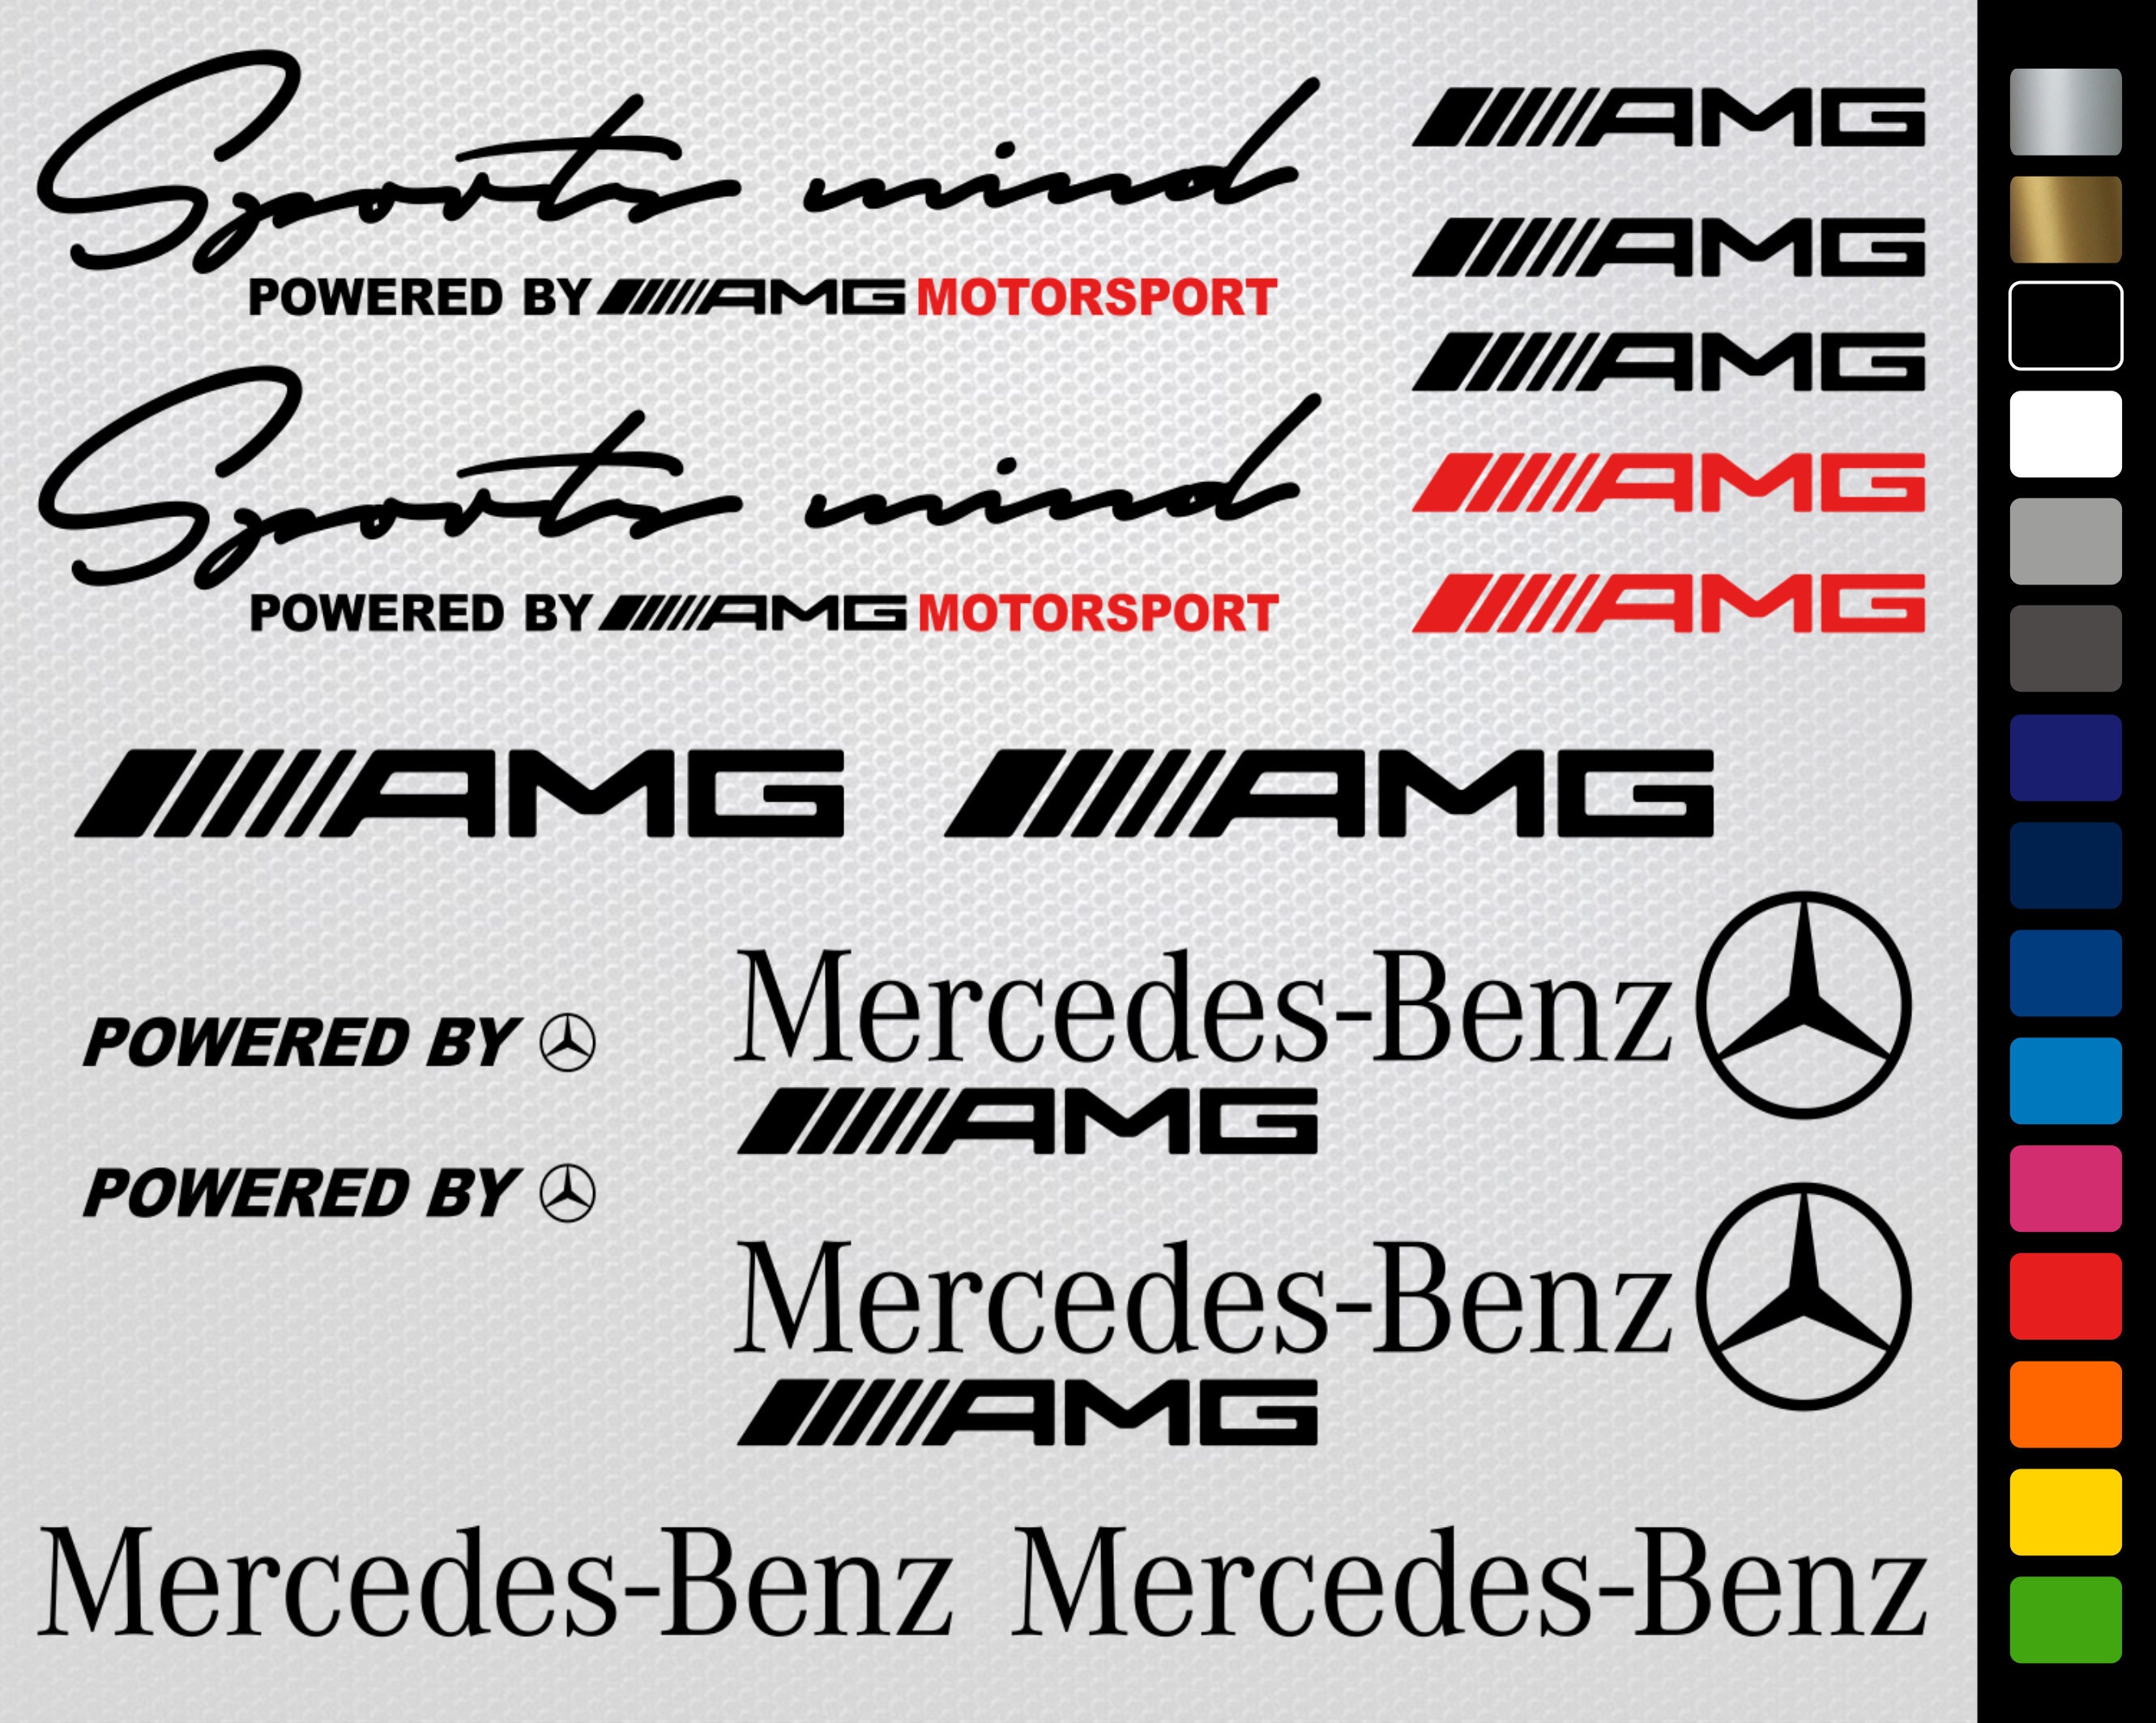 Powered by Mercedes Sticker Amg Decal Sports Mind Benz Accessories for  Racing Tuning Aufkleber Adhesives Vinyl Cut 